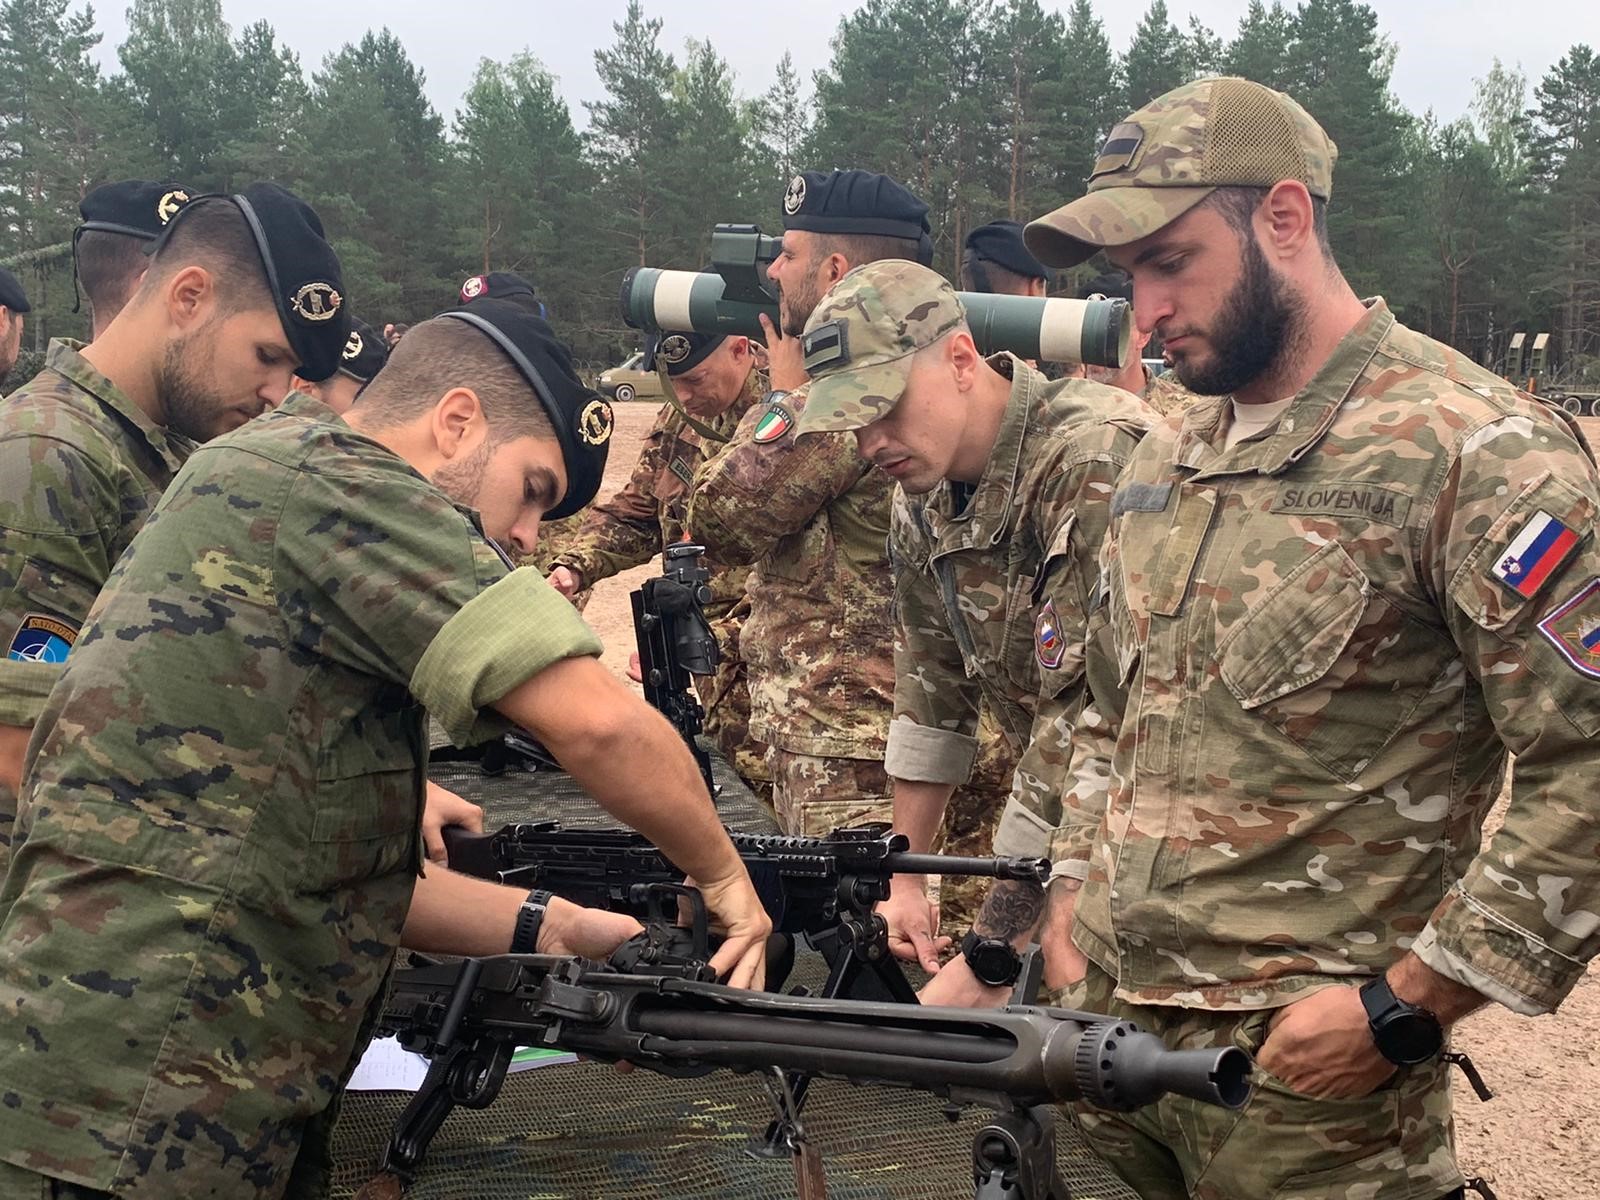 Spaniards showing their weaponry to Slovenian troops